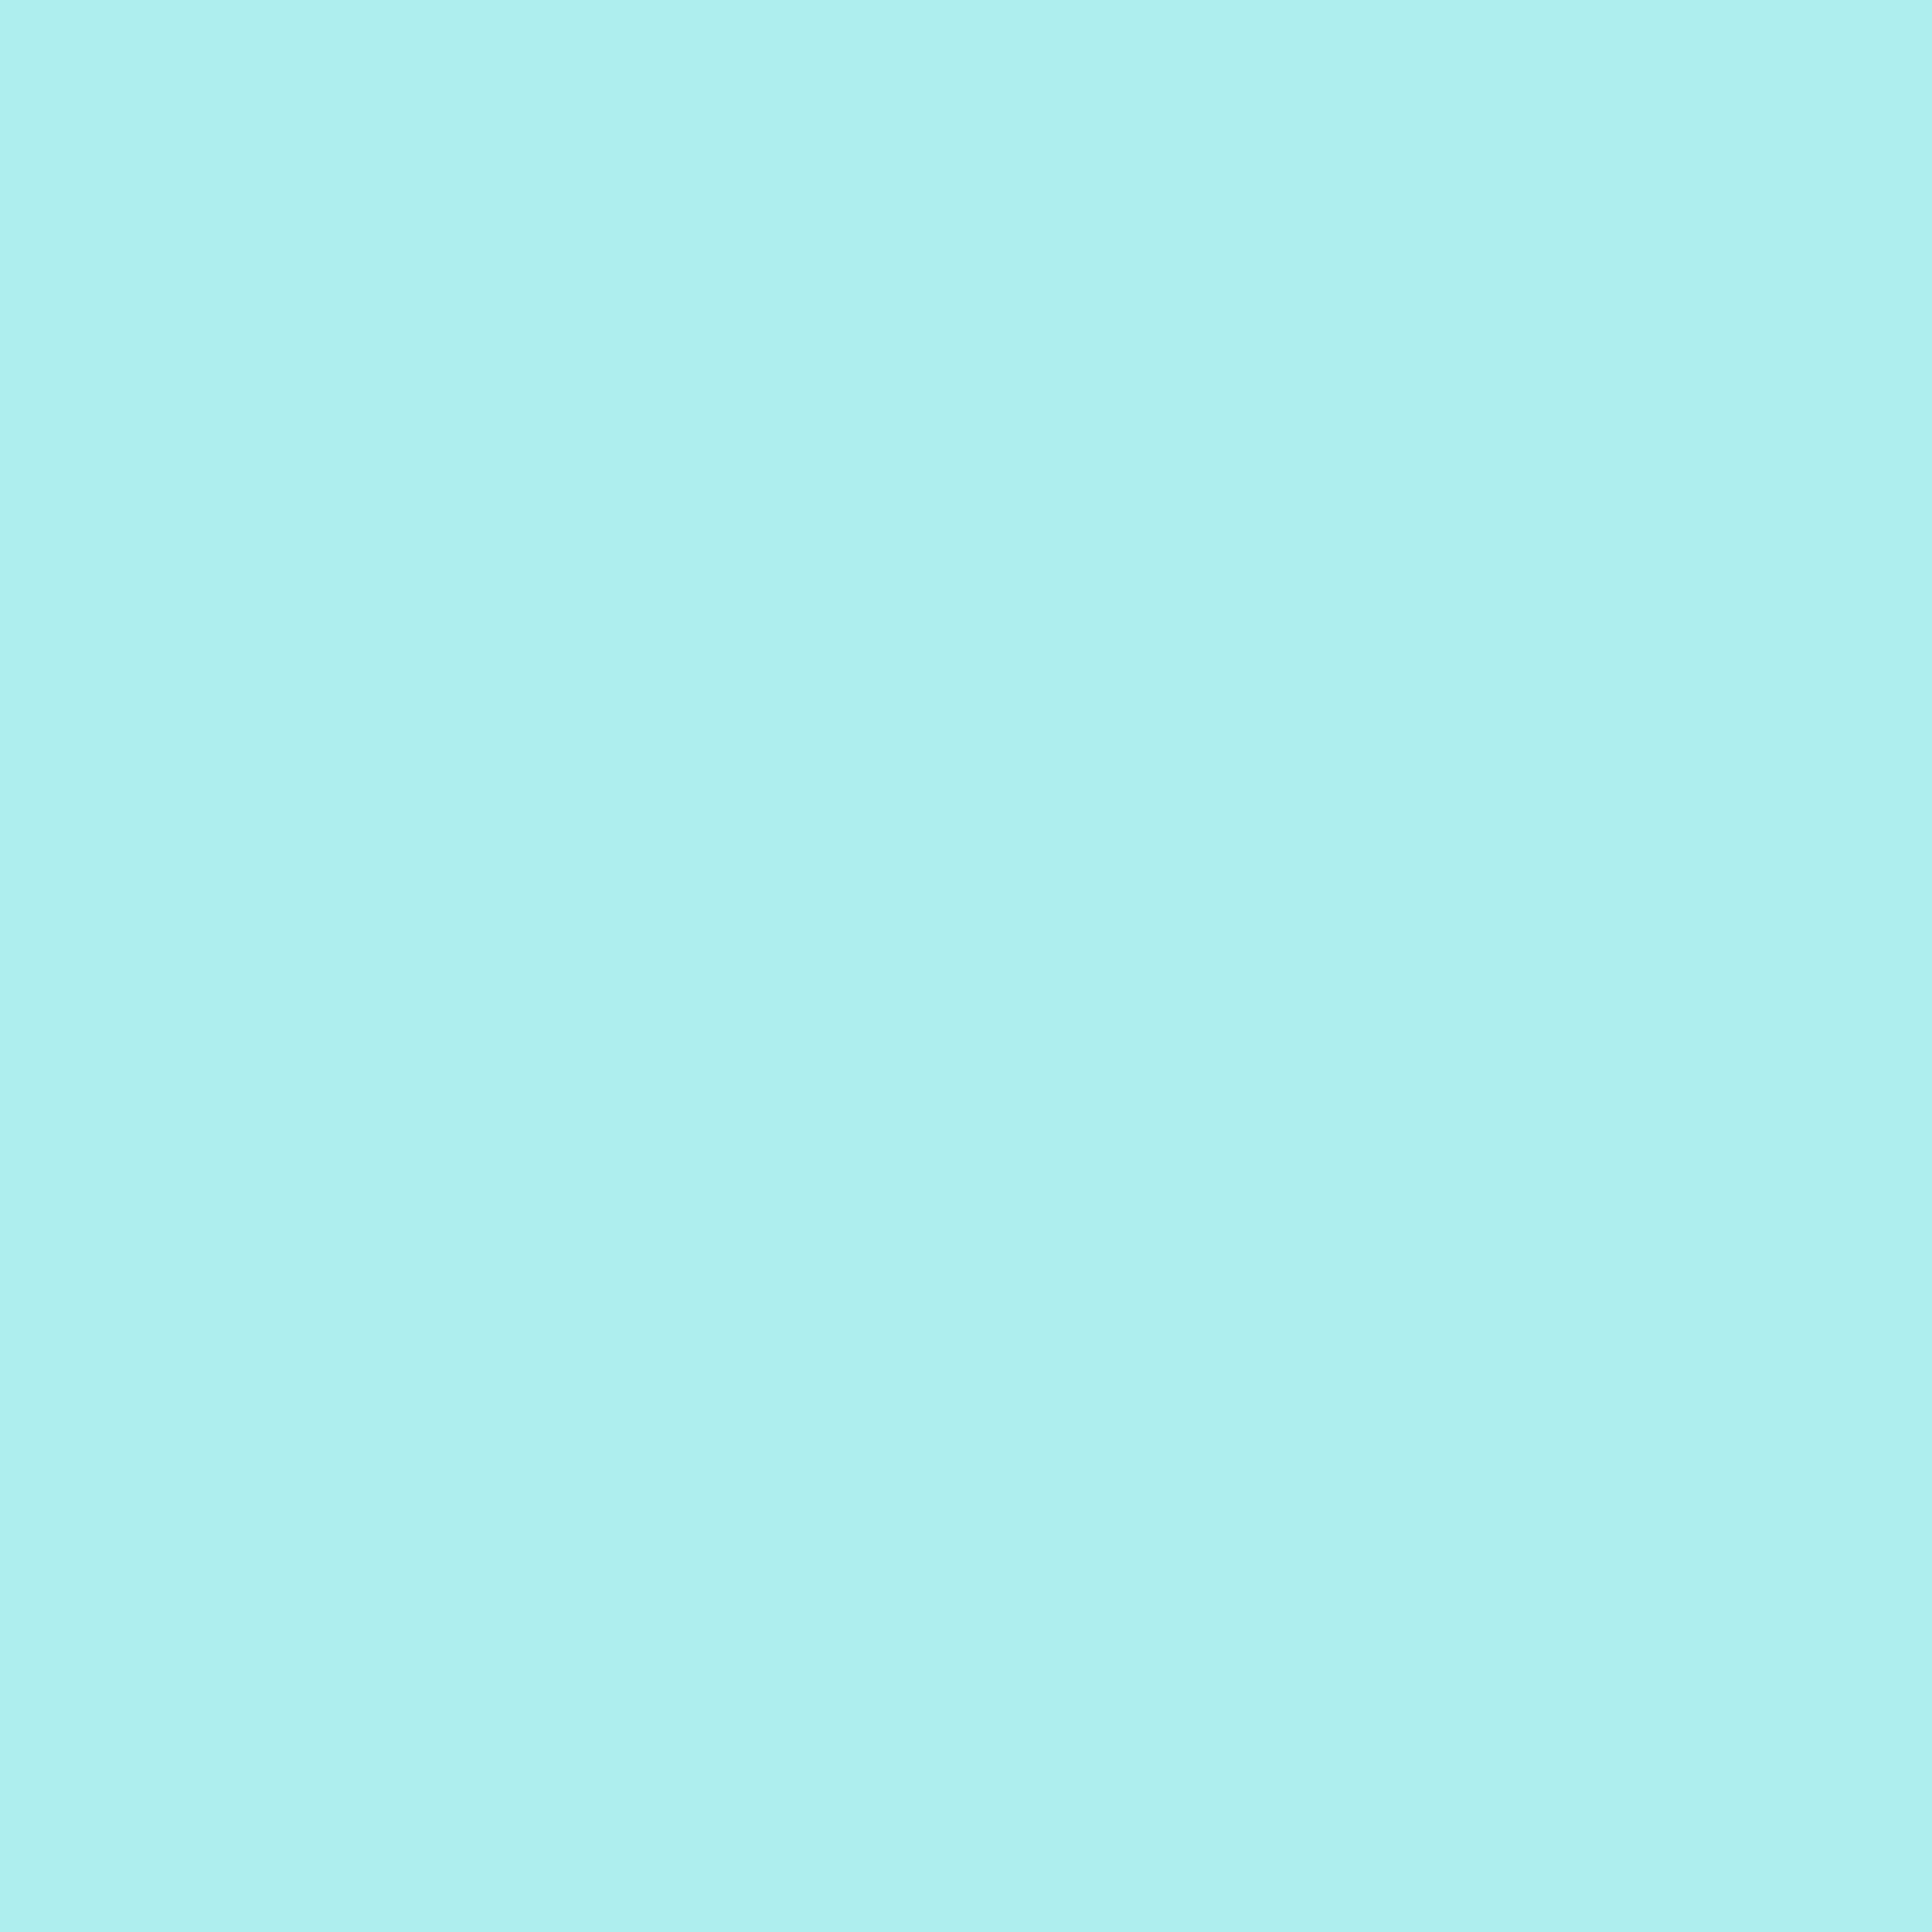 light teal background 9. Background Check All